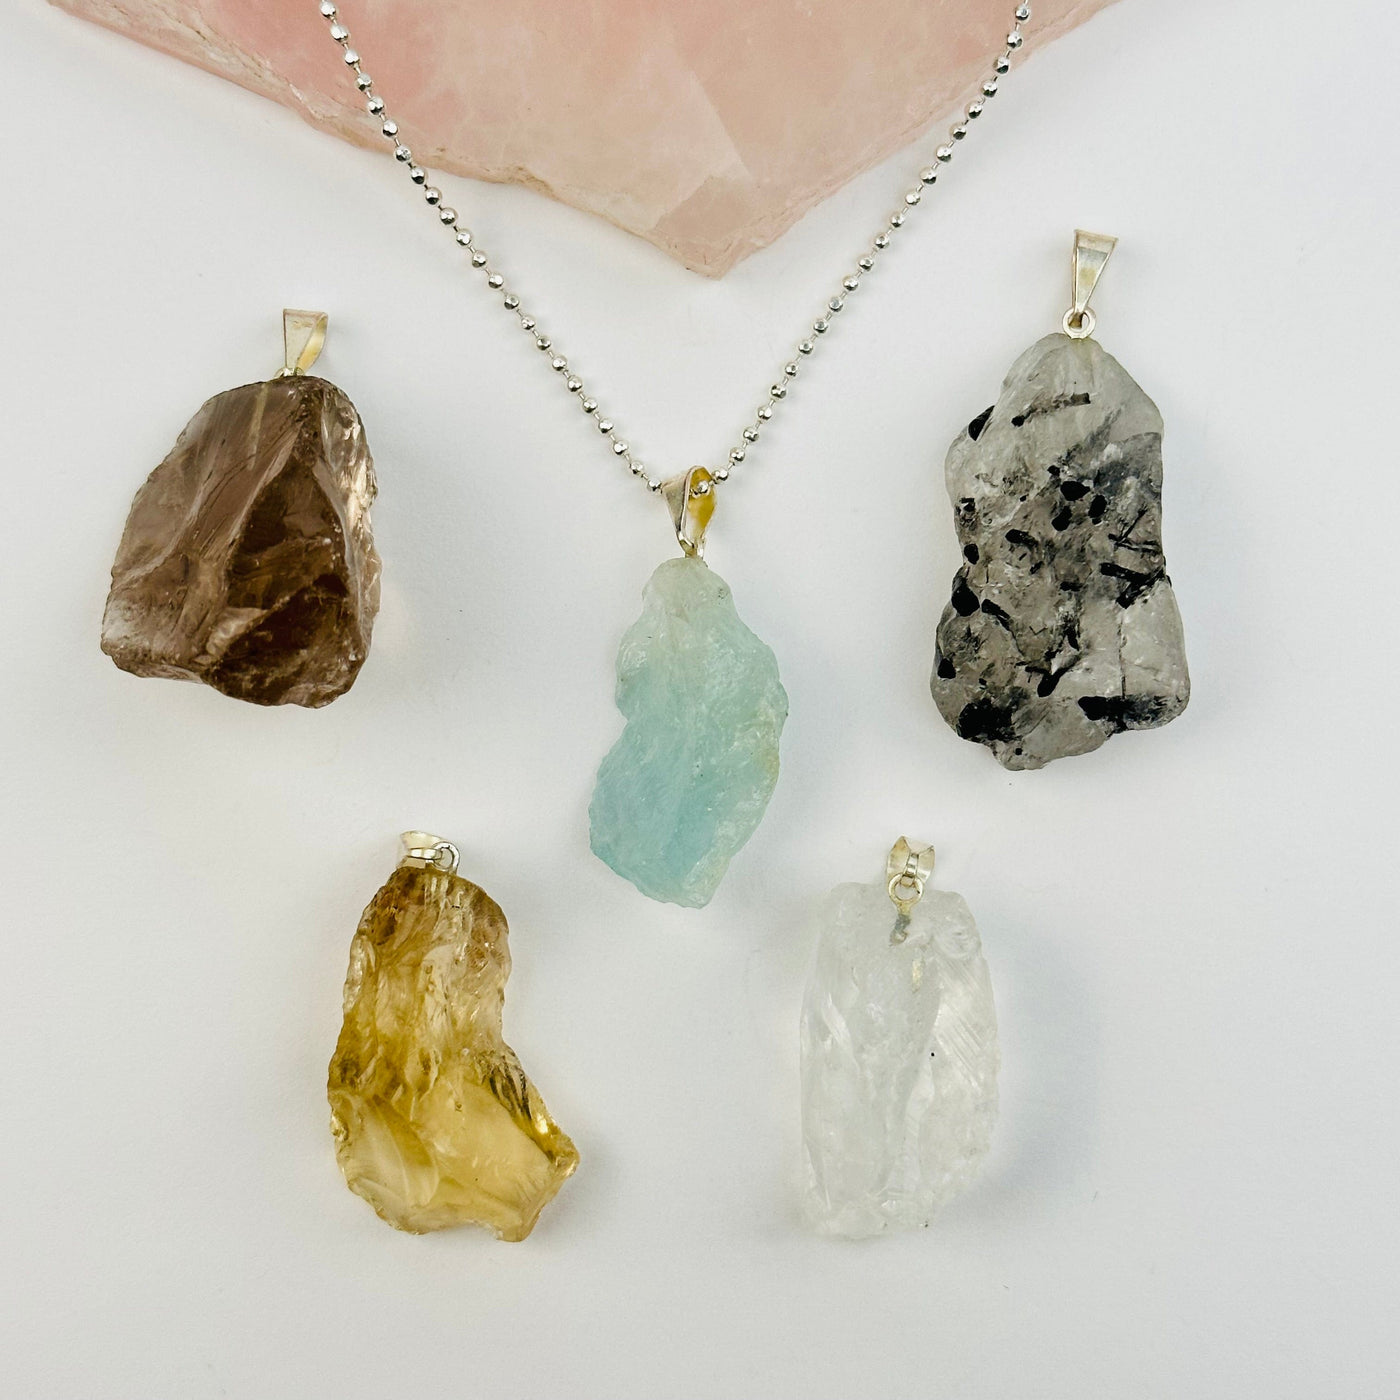 pendants displayed to show the differences in the gemstones 